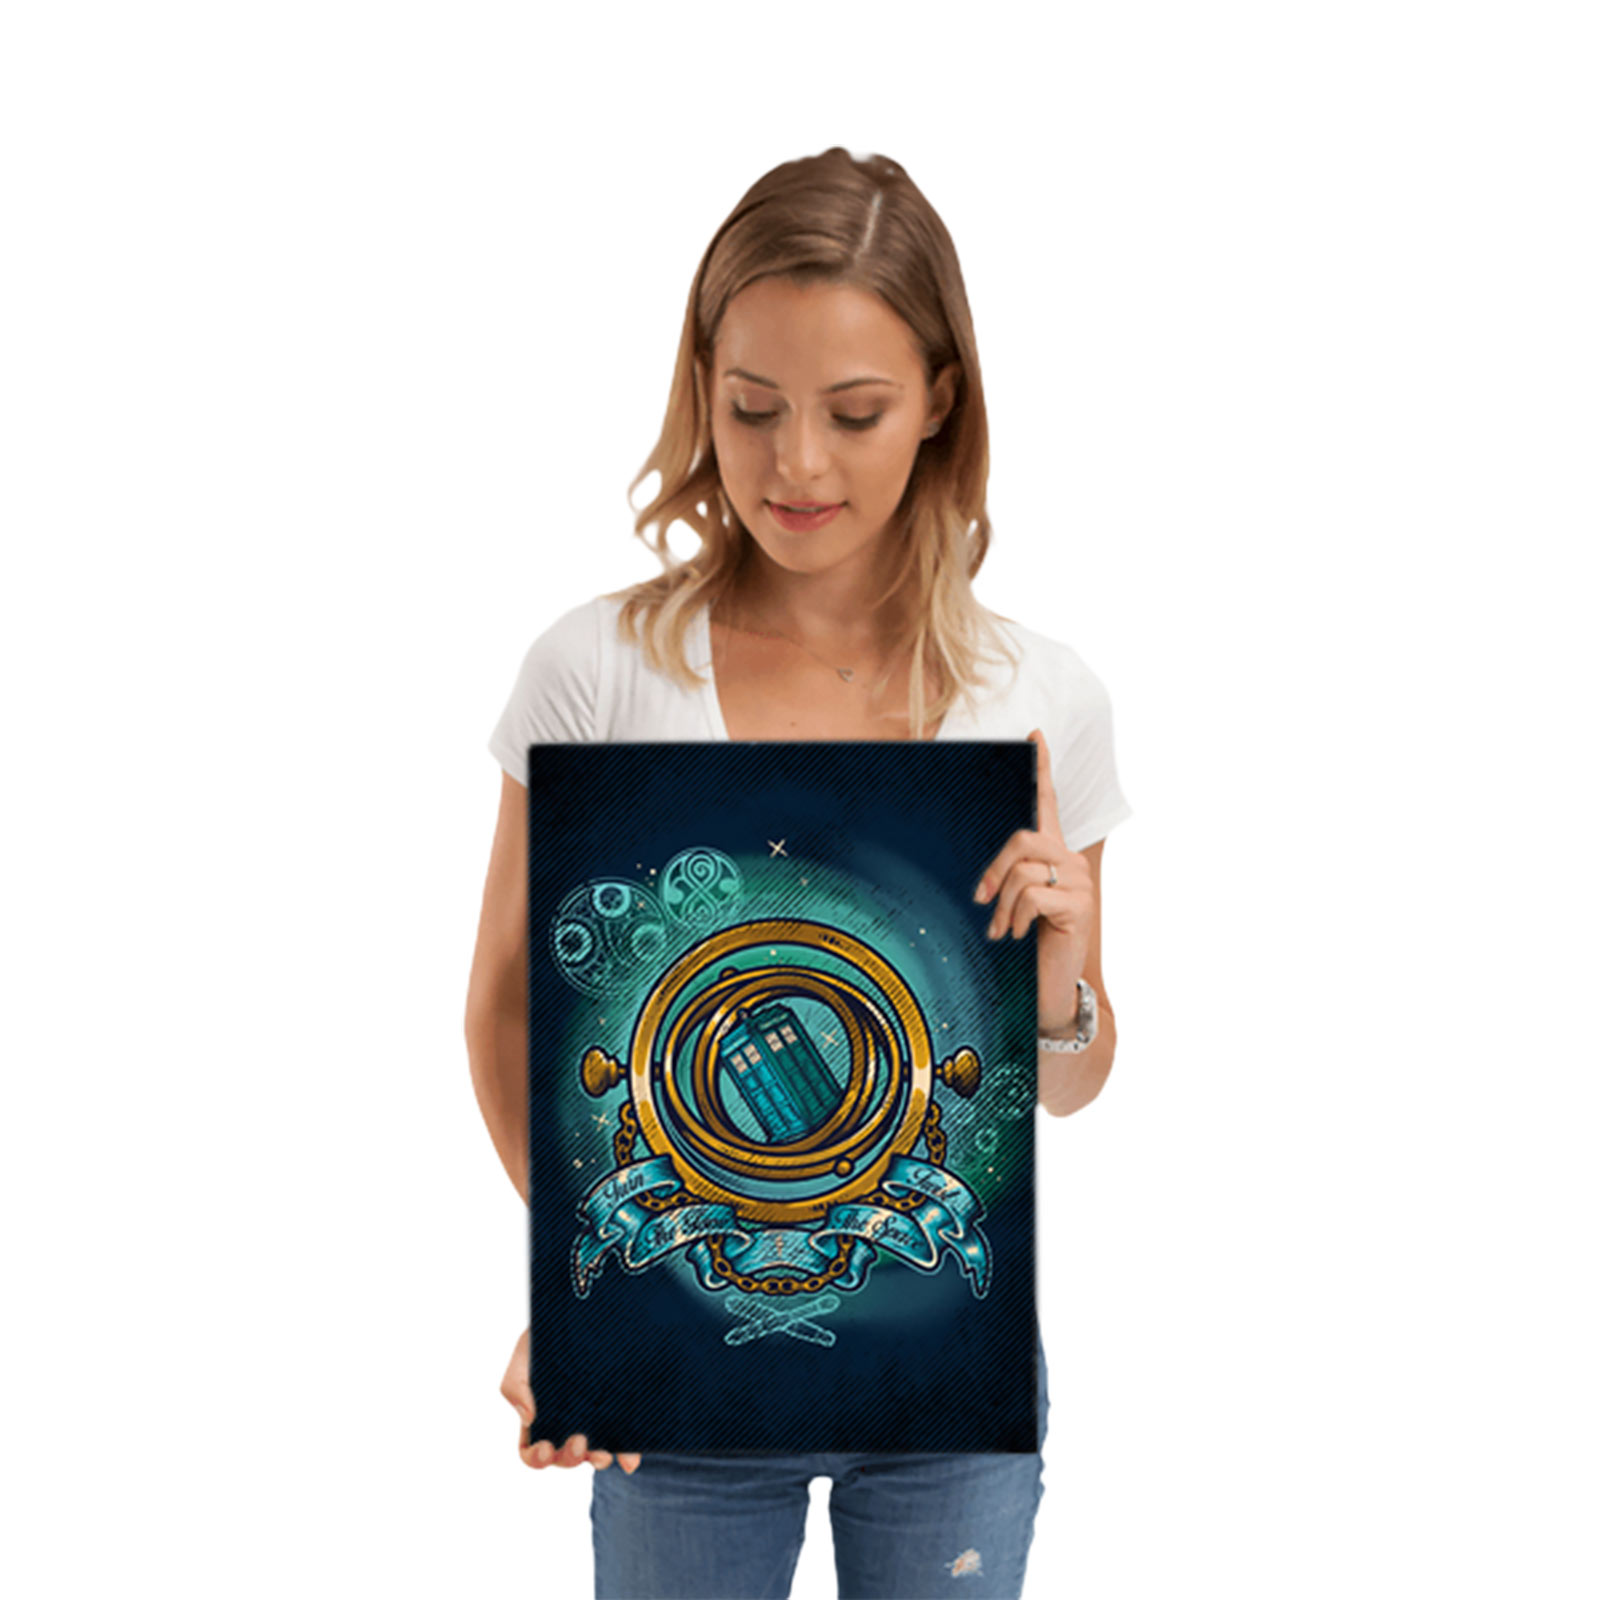 Turn Time Twist Space Metall Poster für Doctor Who Fans